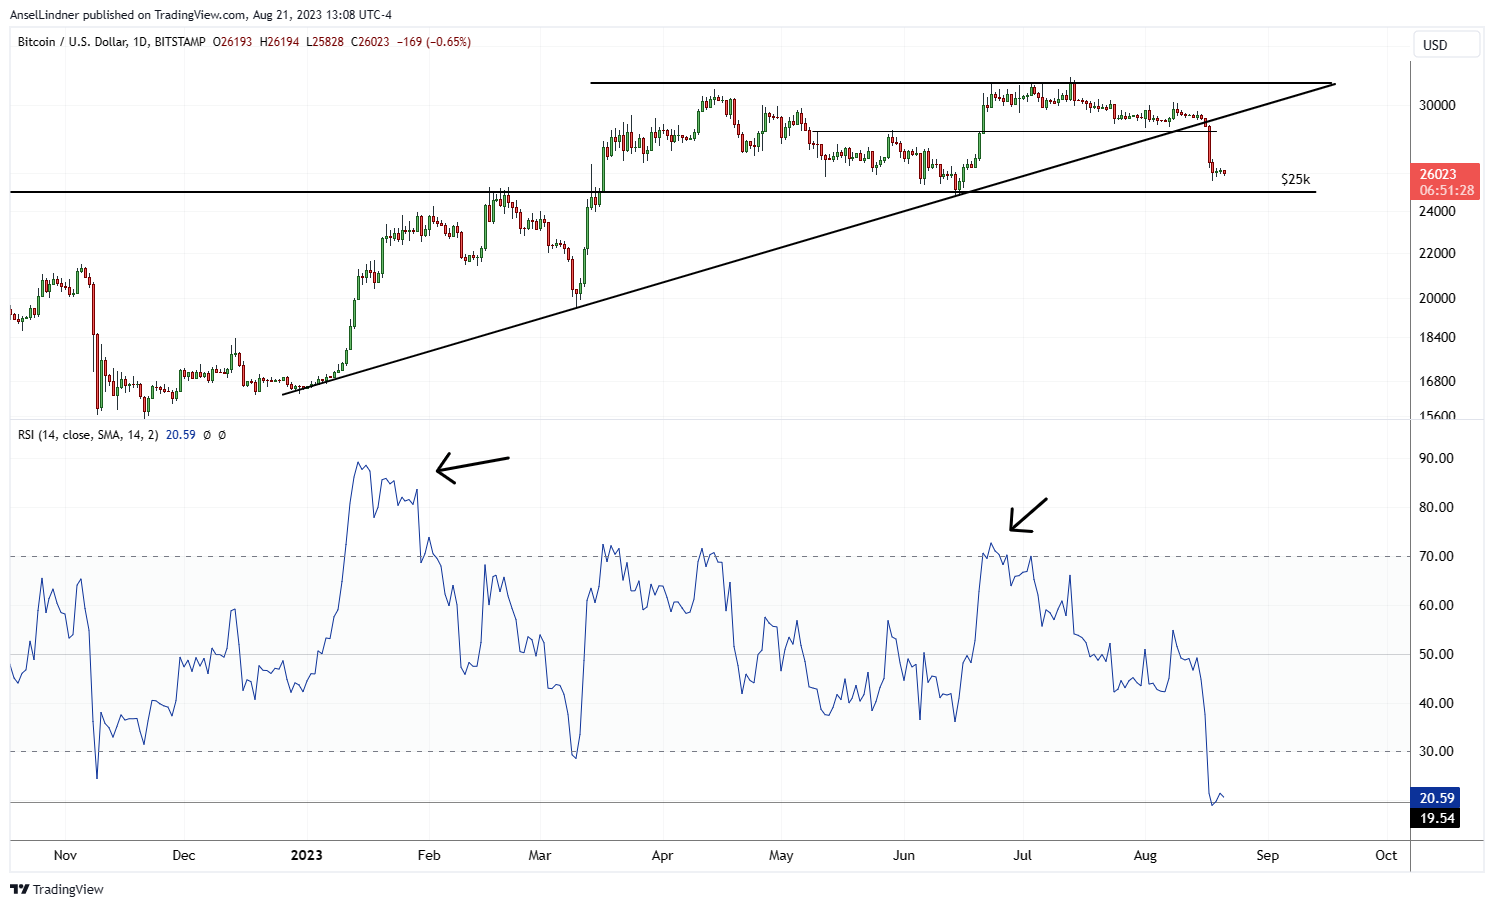 Bitcoin daily chart with RSI showing Blackrock did cause overheating